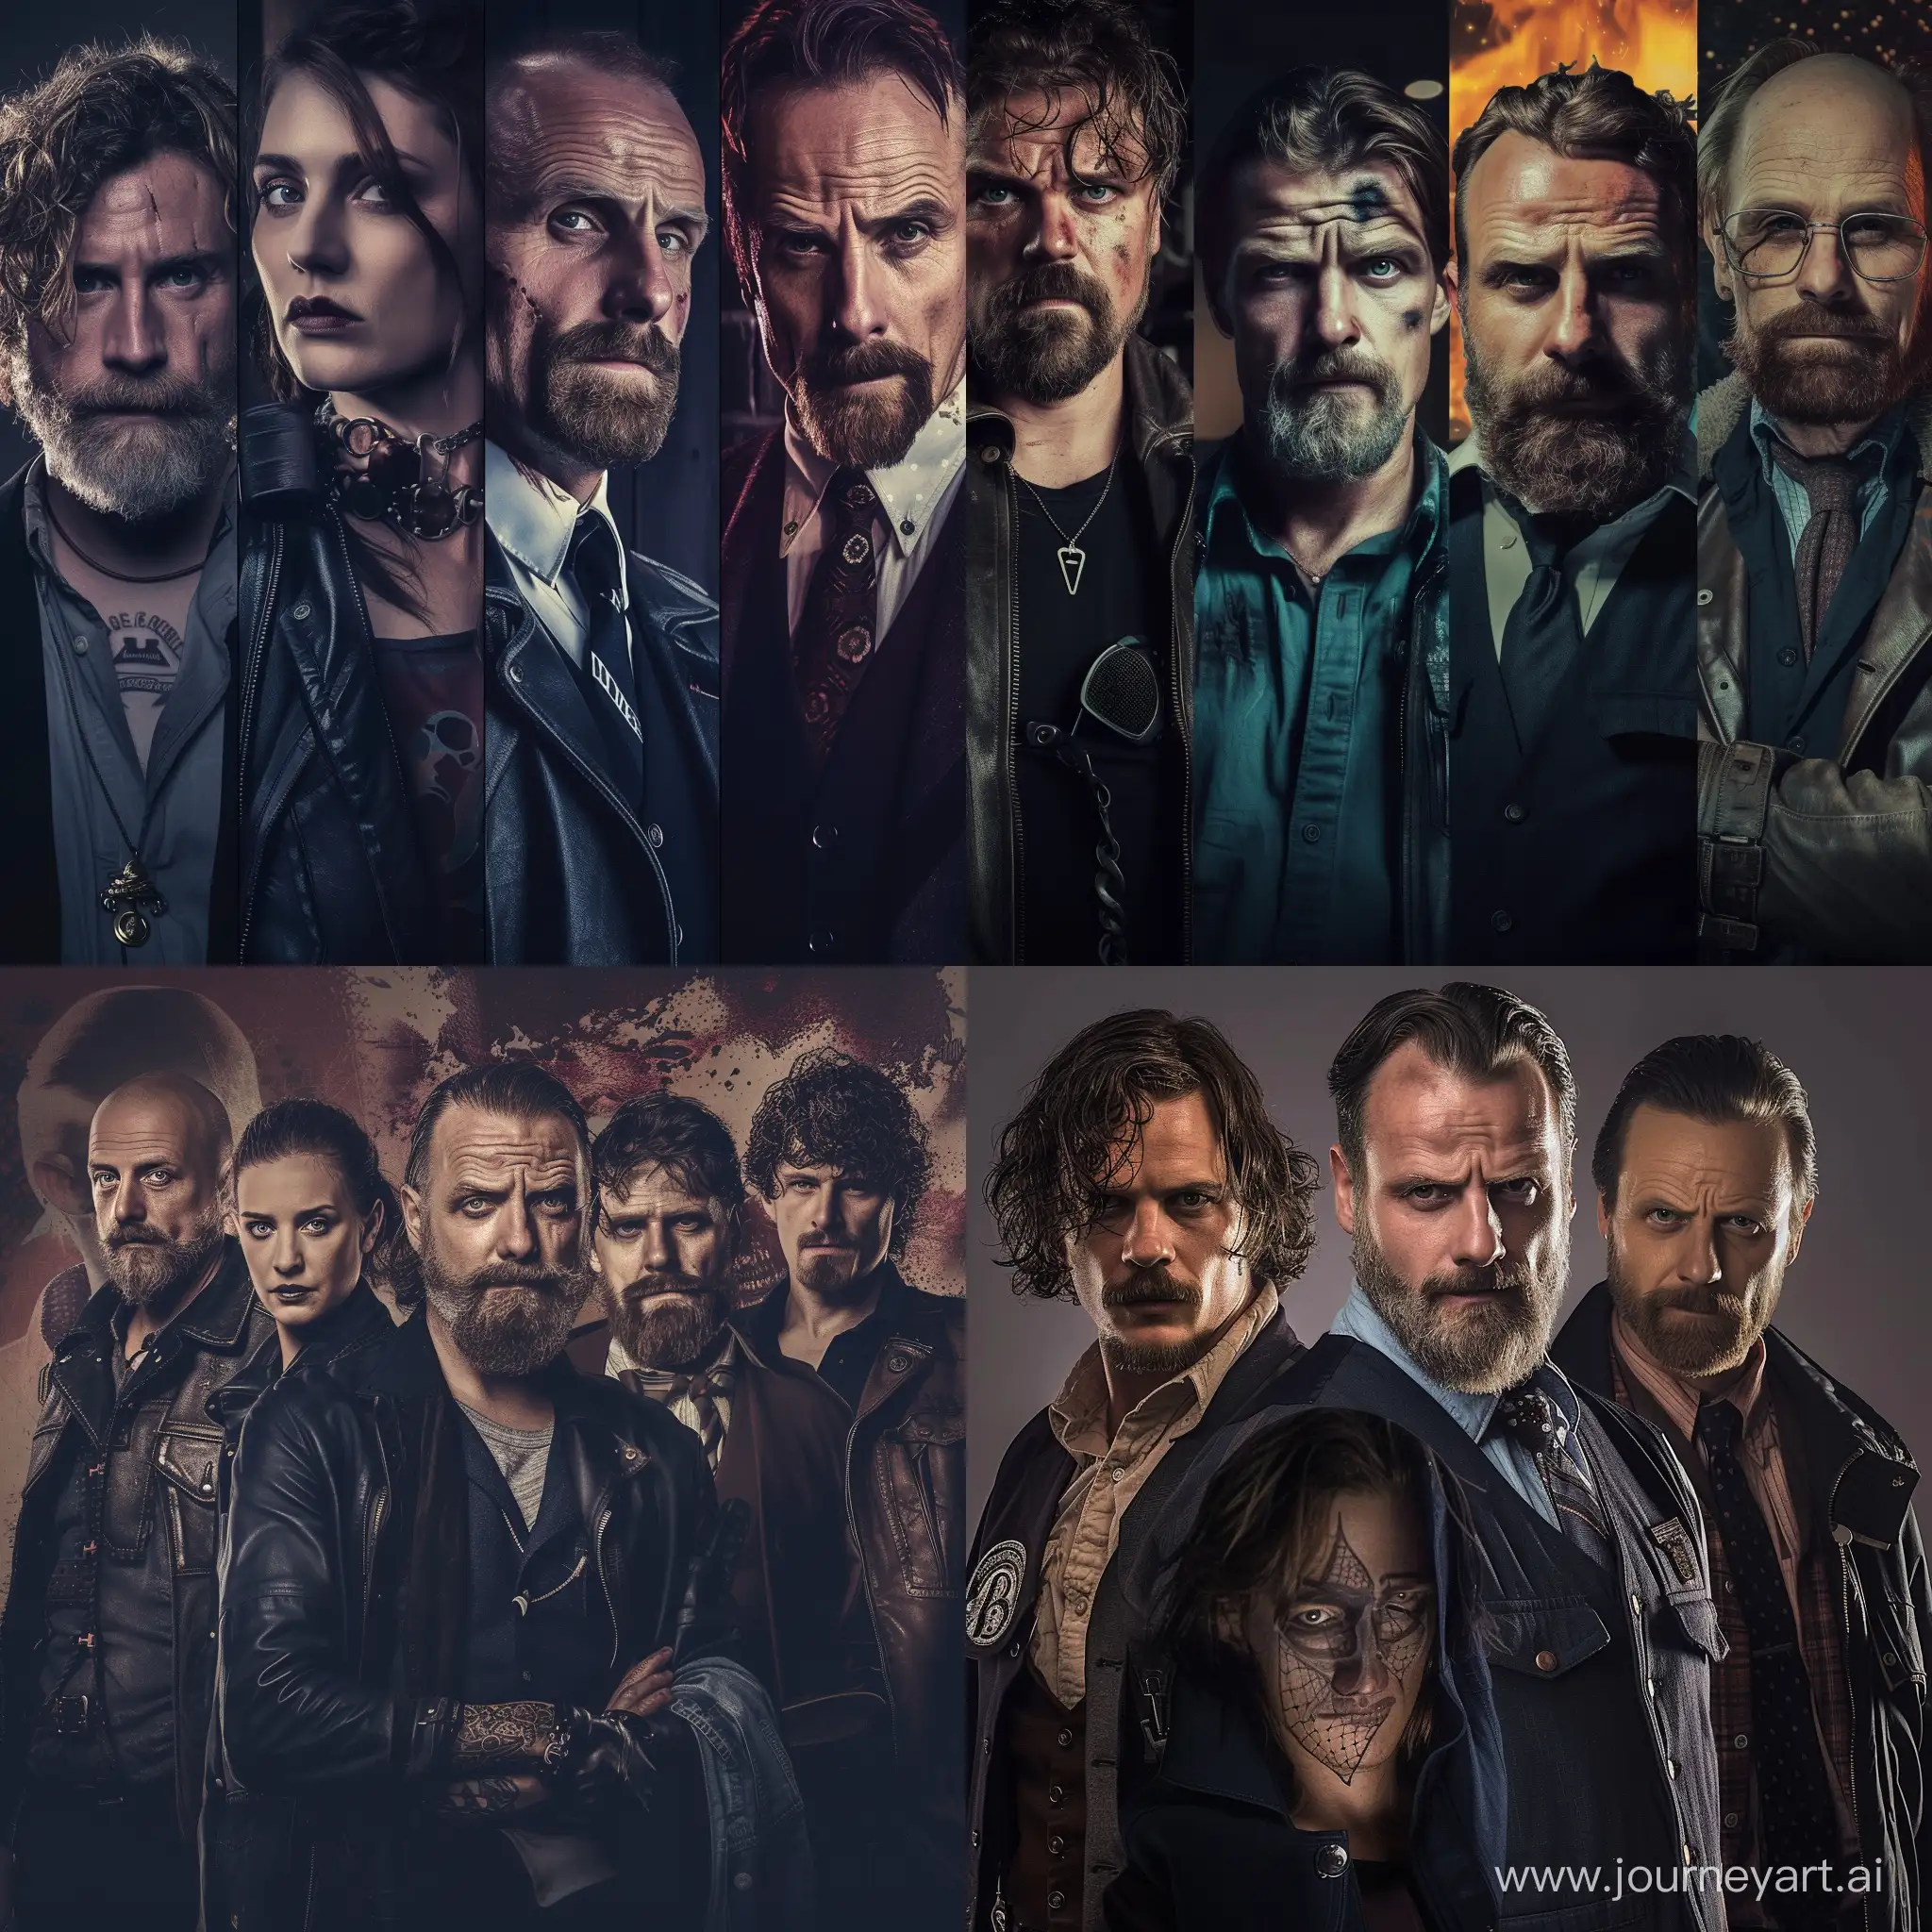 Iconic-Characters-from-Sons-of-Anarchy-Walking-Dead-Peaky-Blinders-and-Breaking-Bad-Stand-Together-in-Individual-Themes